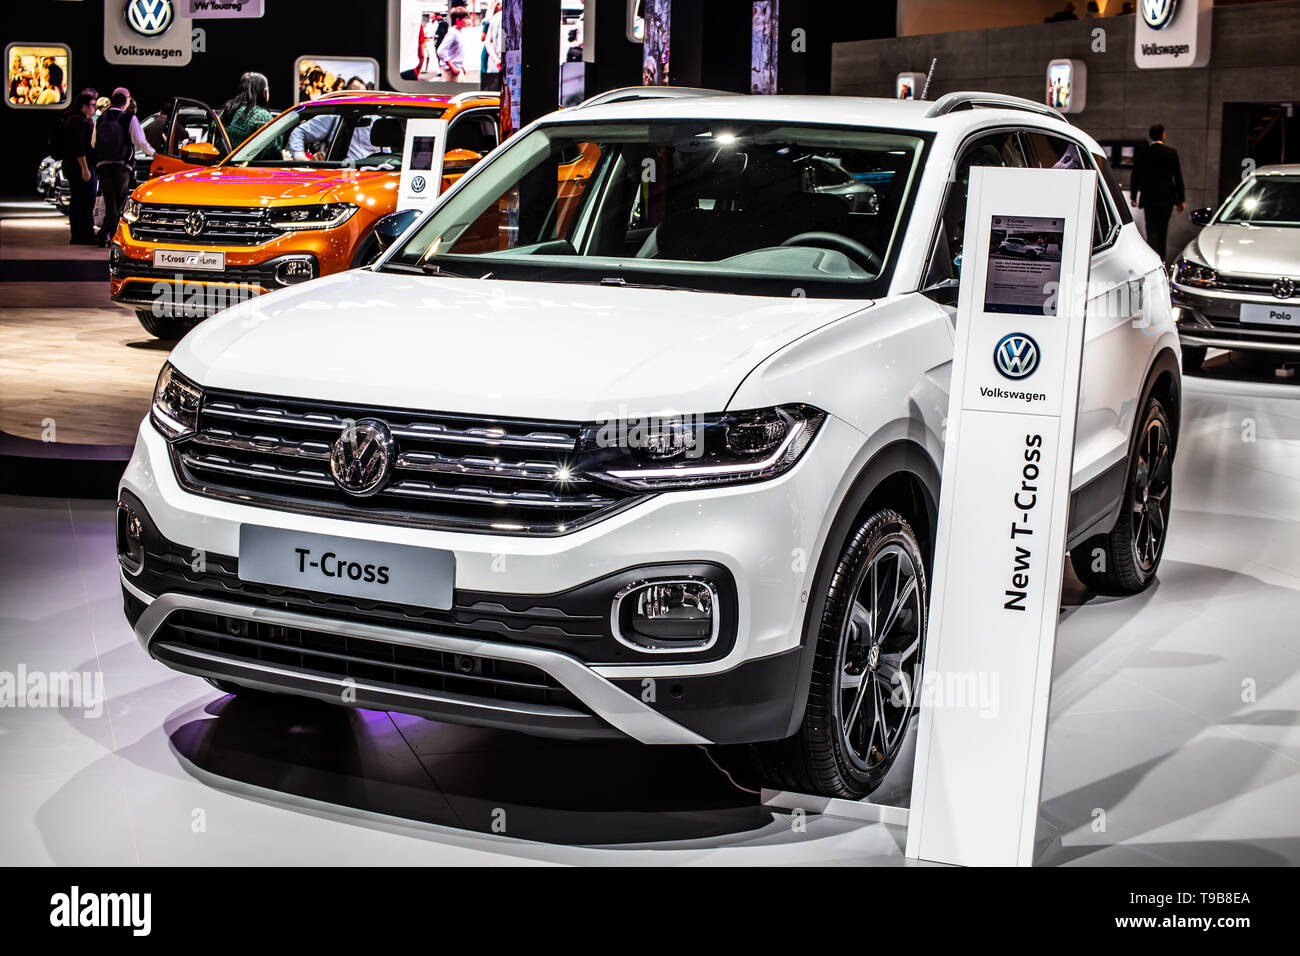 Brussels, Belgium, Jan 18, 2019: metallic white Volkswagen VW T-Cross at  Brussels Motor Show, MQB platform, compact SUV produced by Volkswagen Group  Stock Photo - Alamy